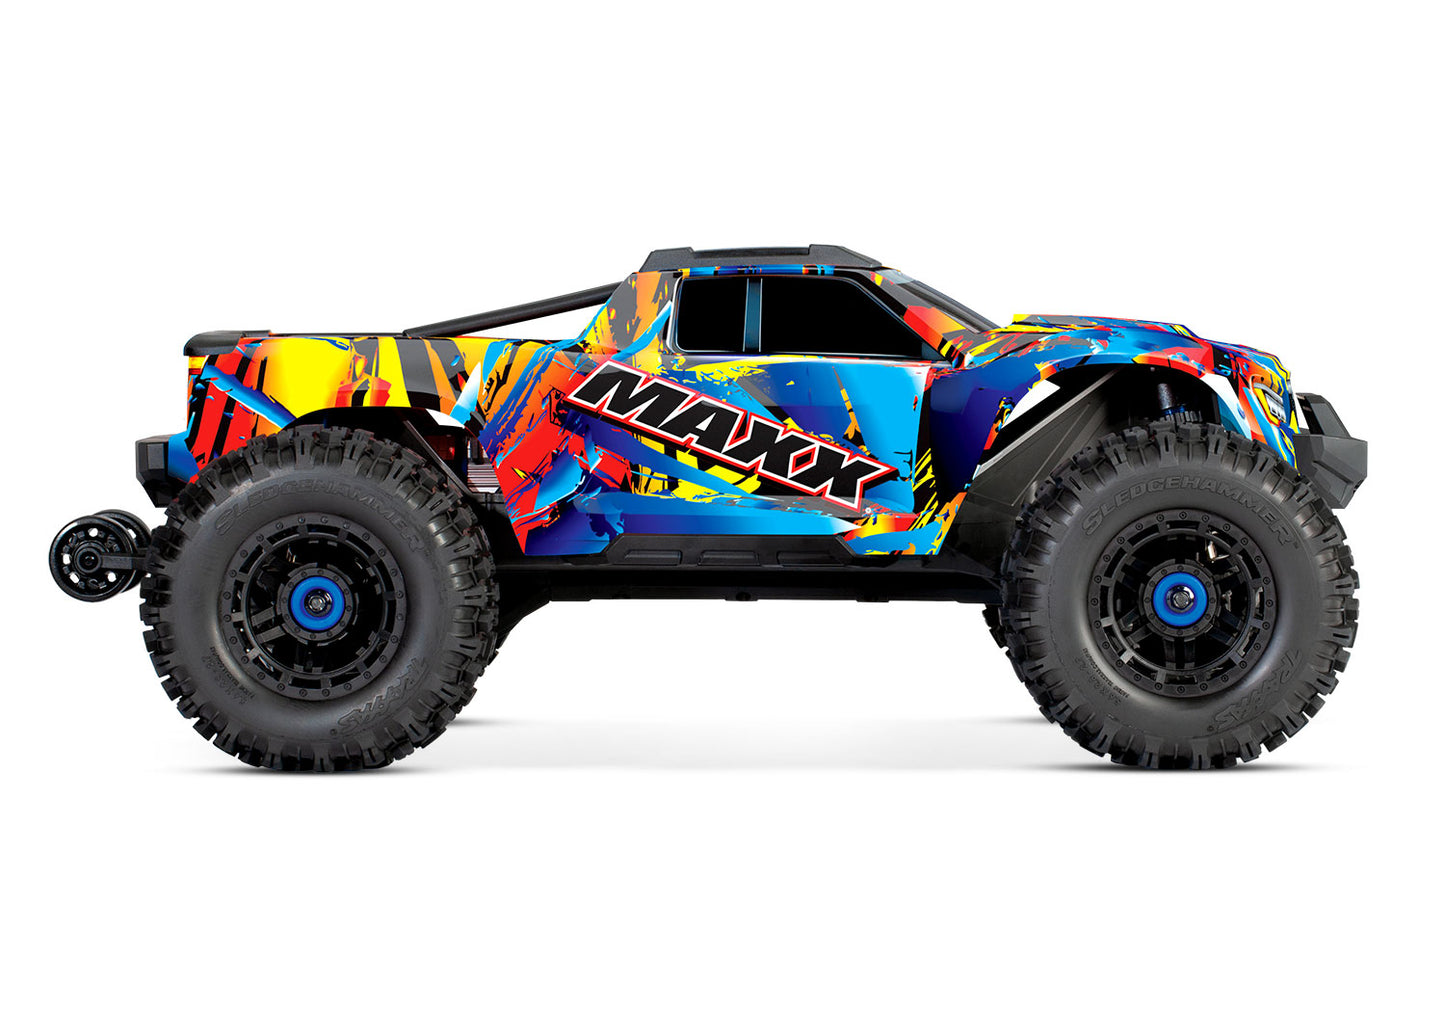 89086-4-RNR 1/10 Scale Maxx with WideMaxx Monster truck